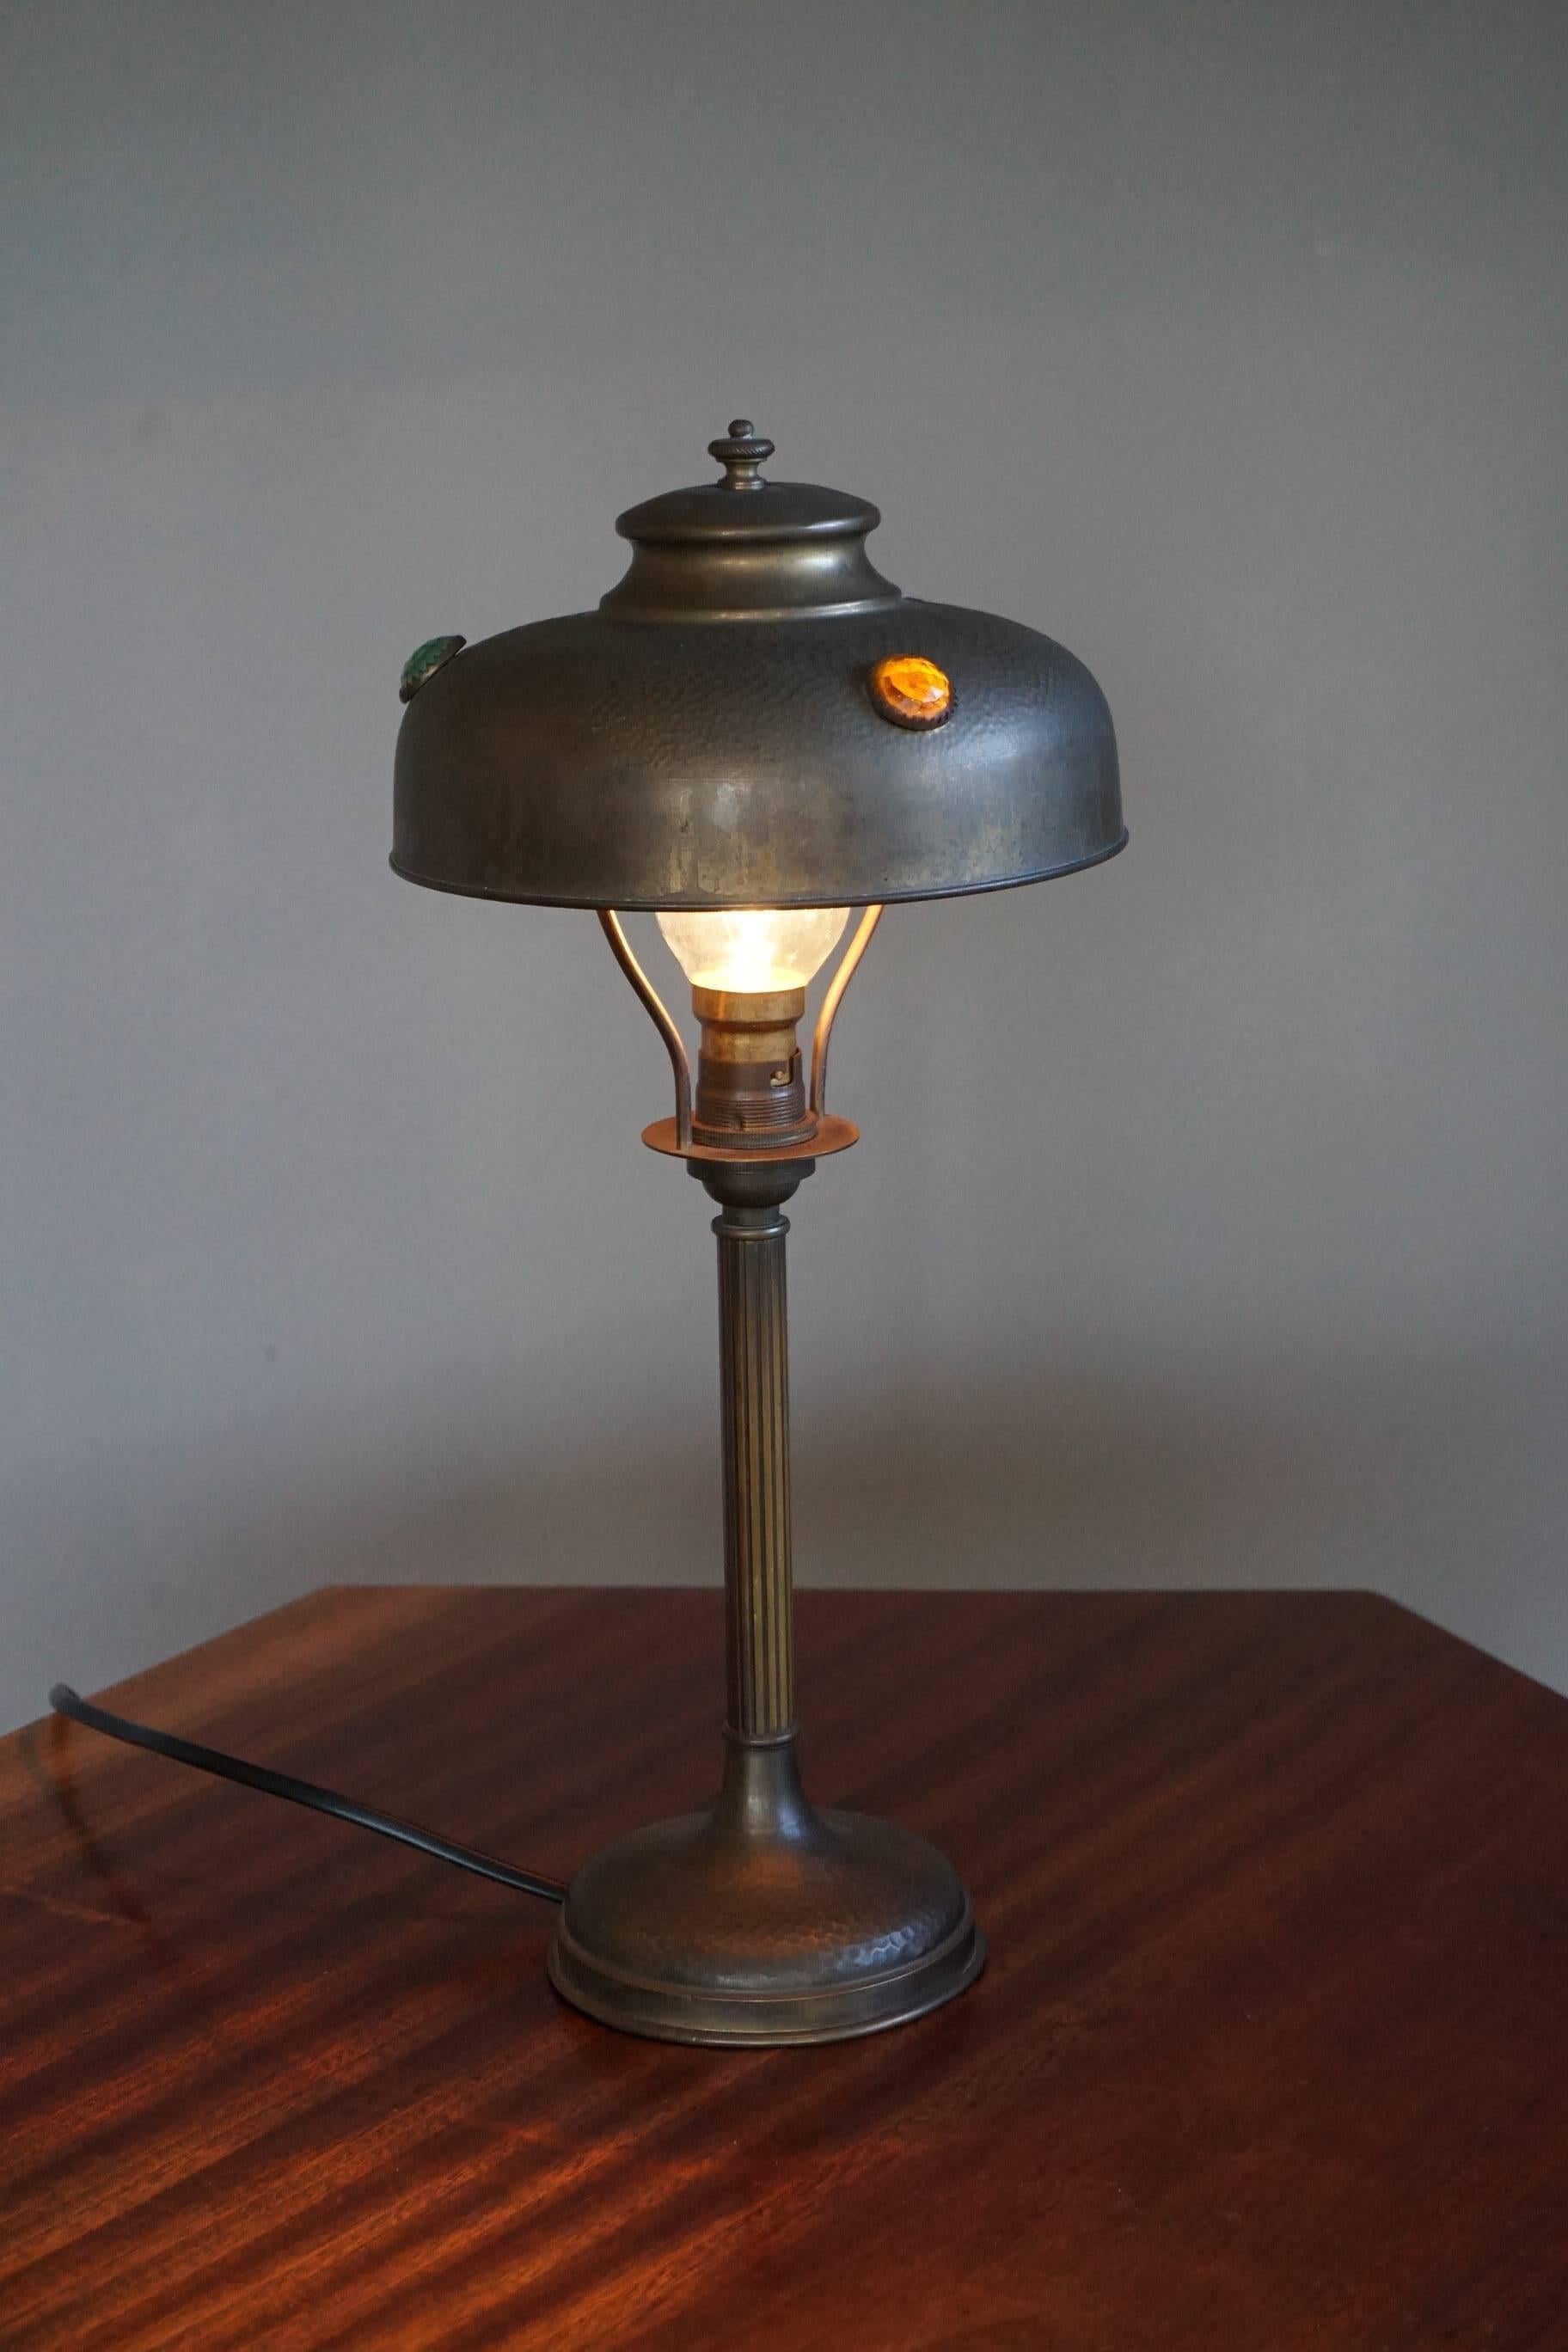 Rare and highly stylish Arts & Crafts lamp.

If you are an enthousiast of early 20th century lighting in general and of the Arts & Crafts style in particular then this antique lamp could be perfect for you. Handcrafted from brass and copper and